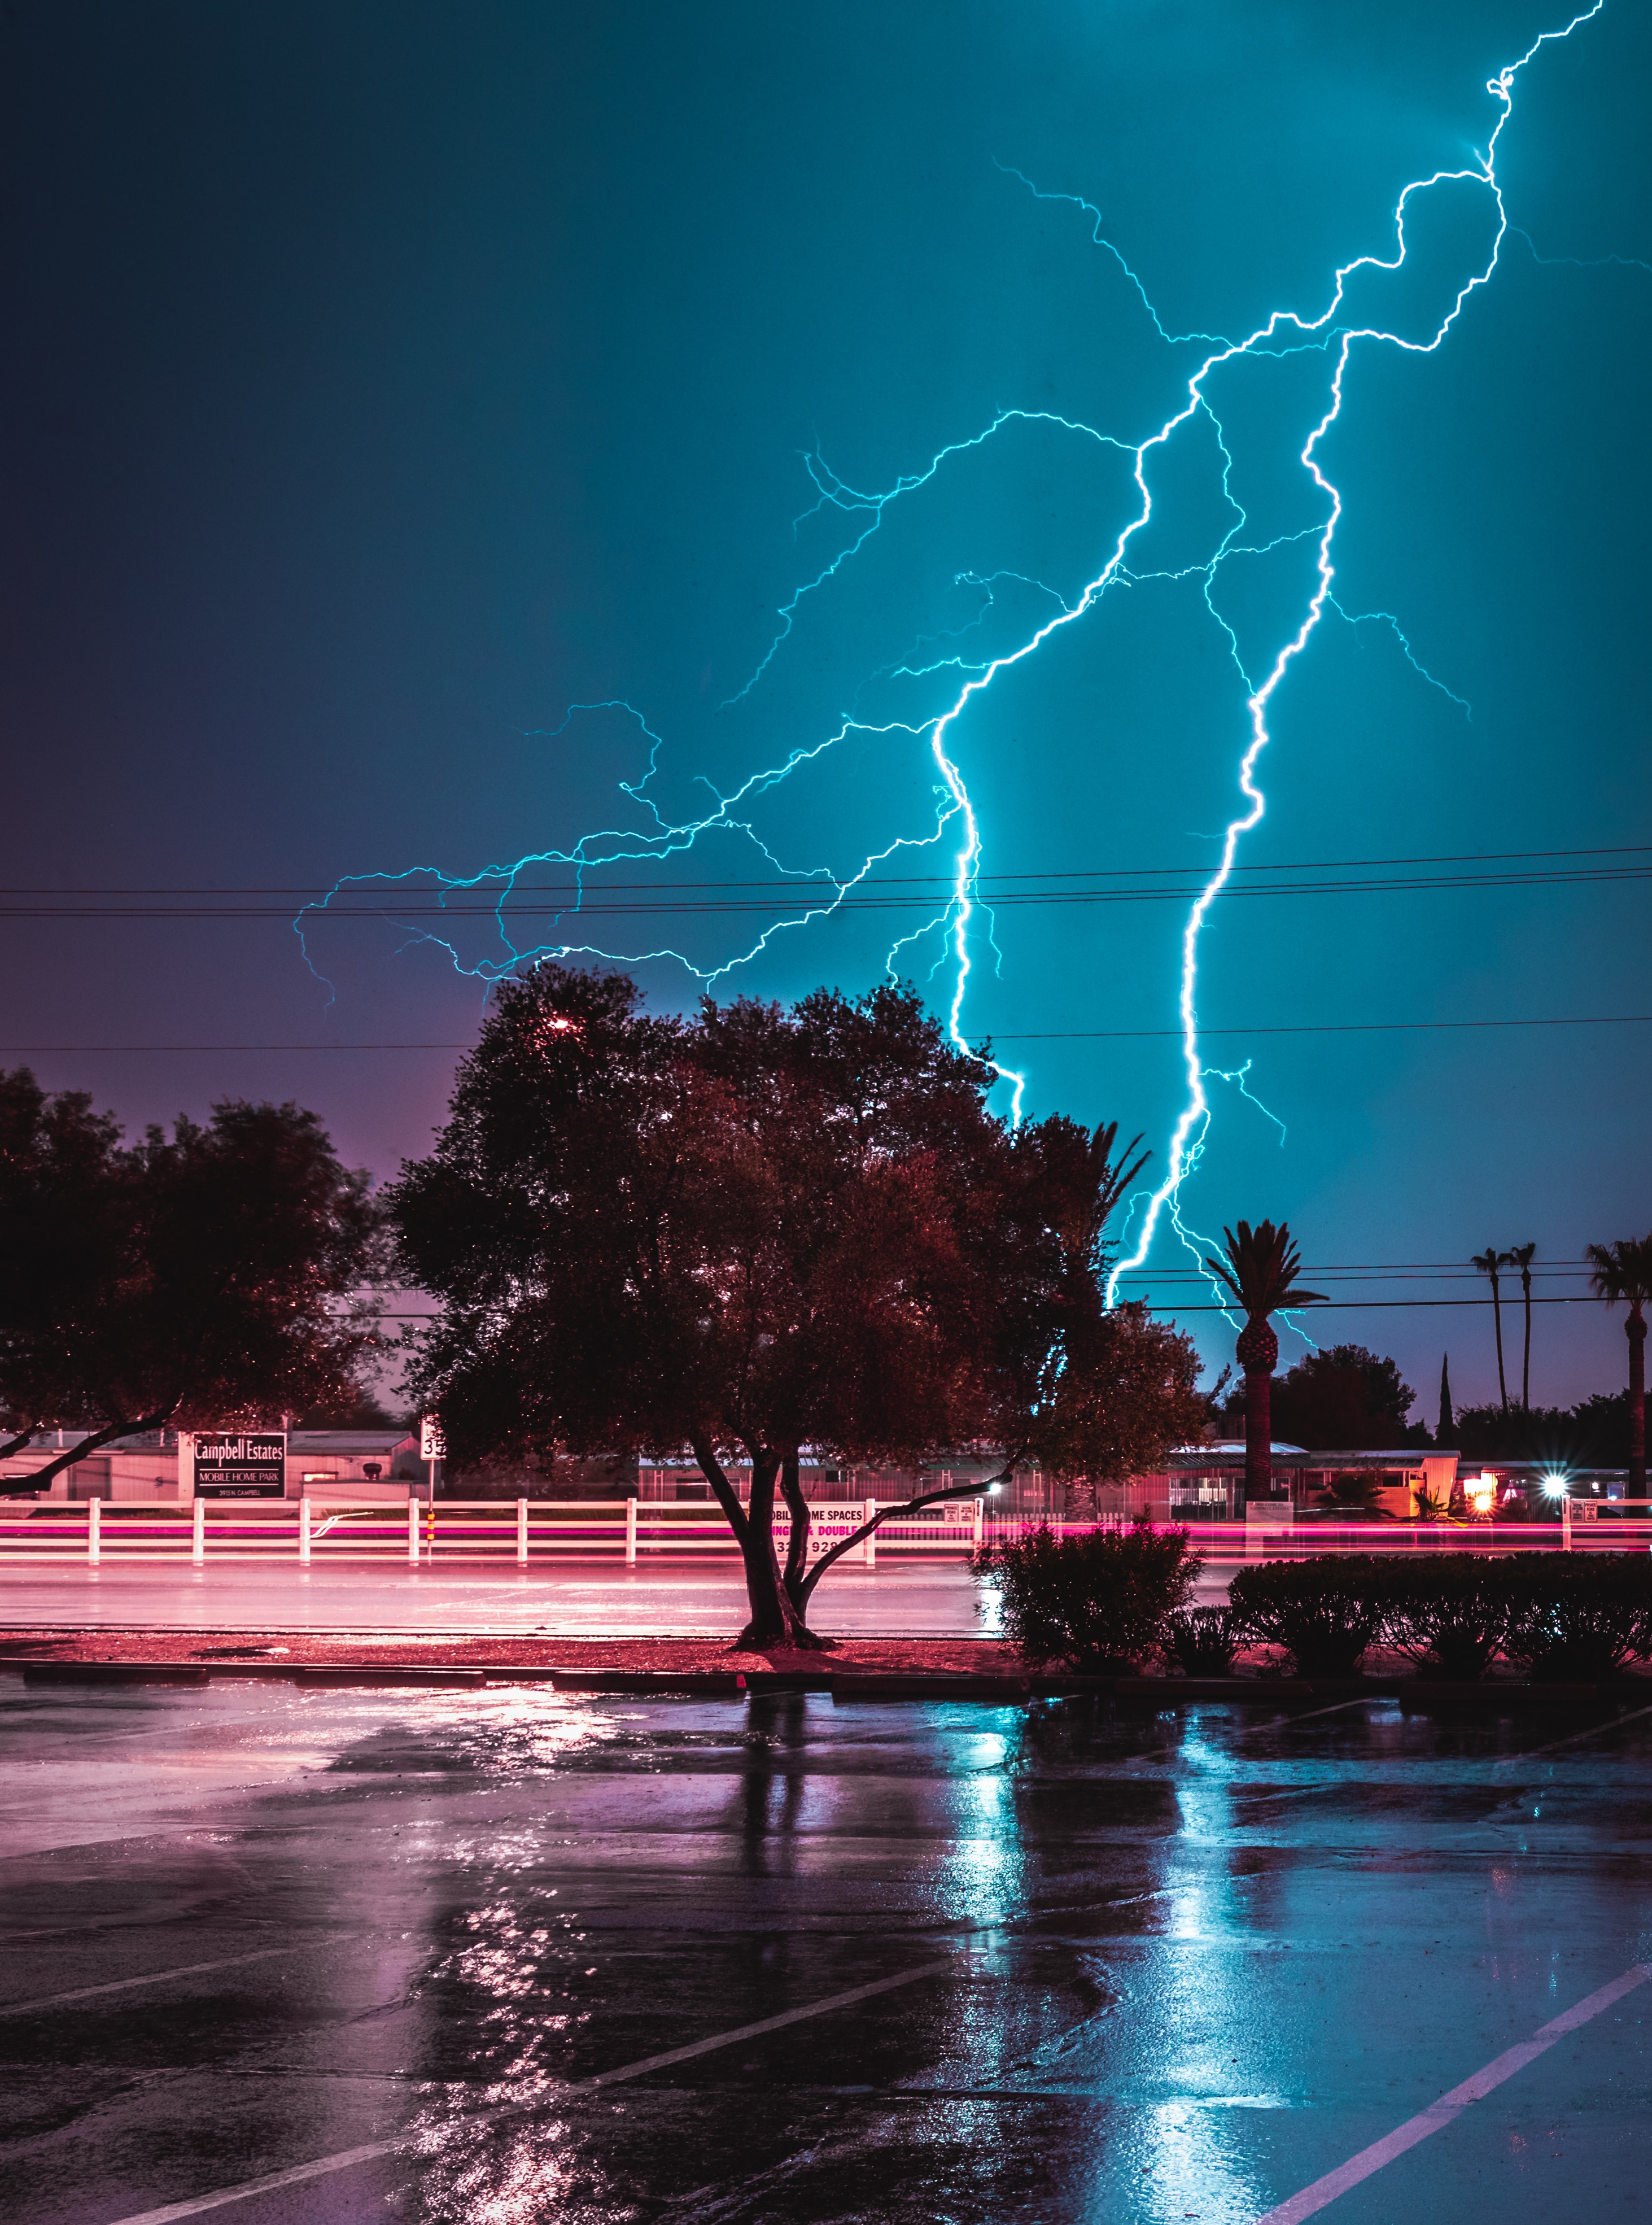 Lightning protection systems in high lightning density areas